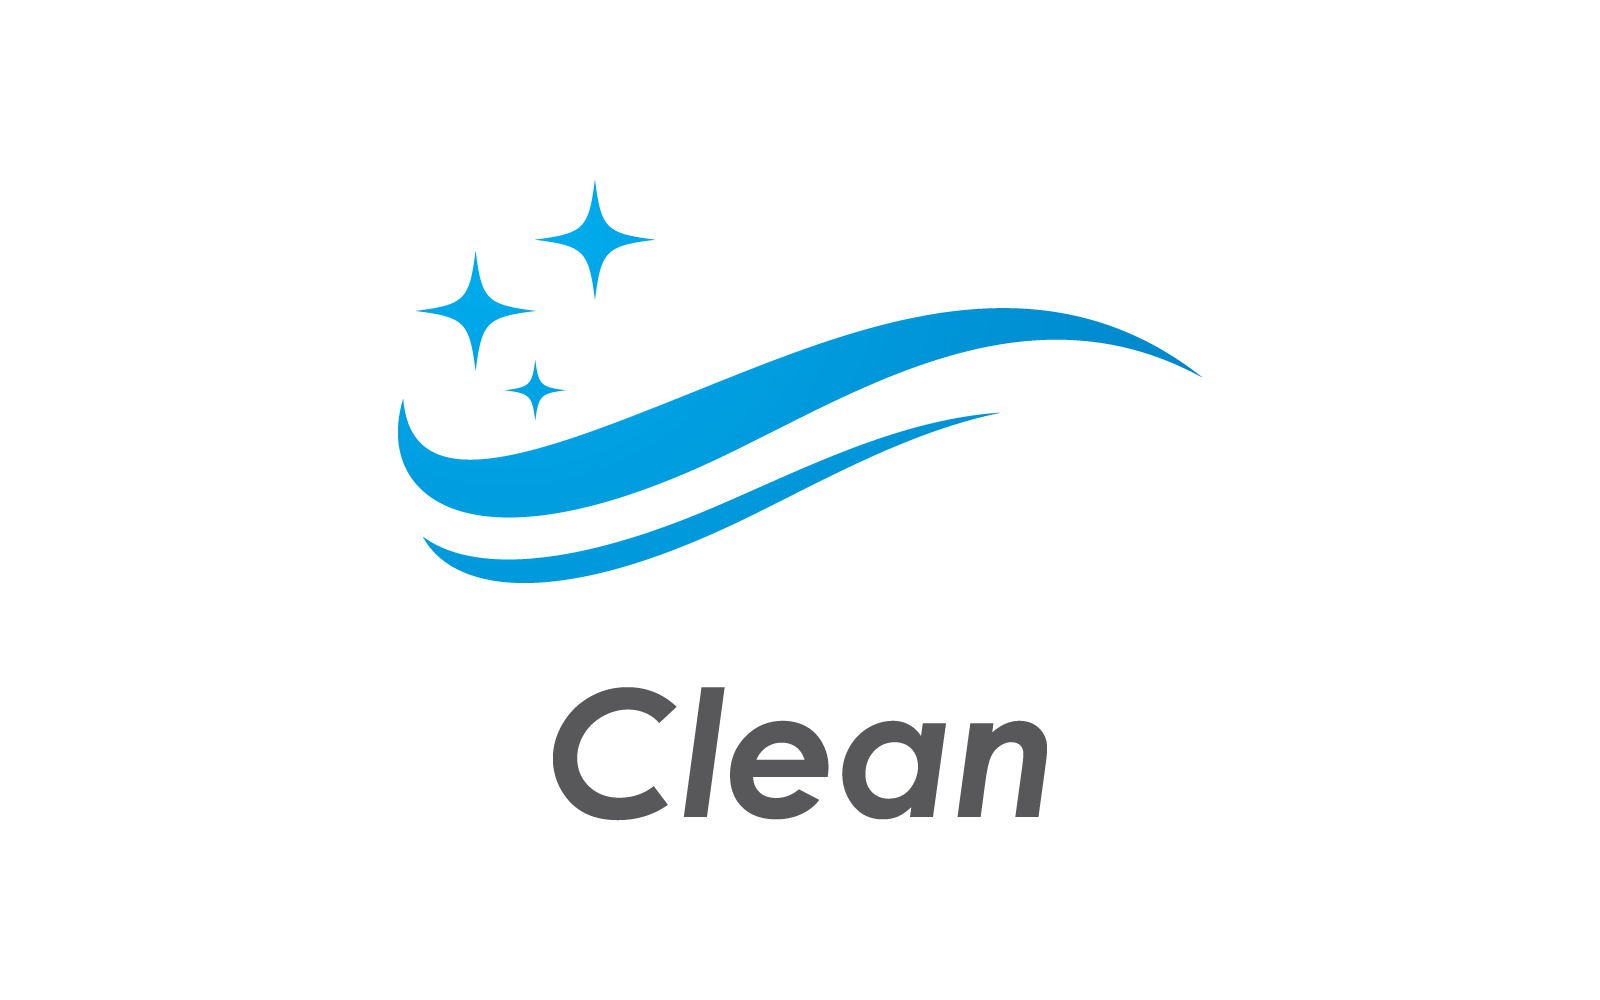 Cleaning logo and symbol illustration vector template